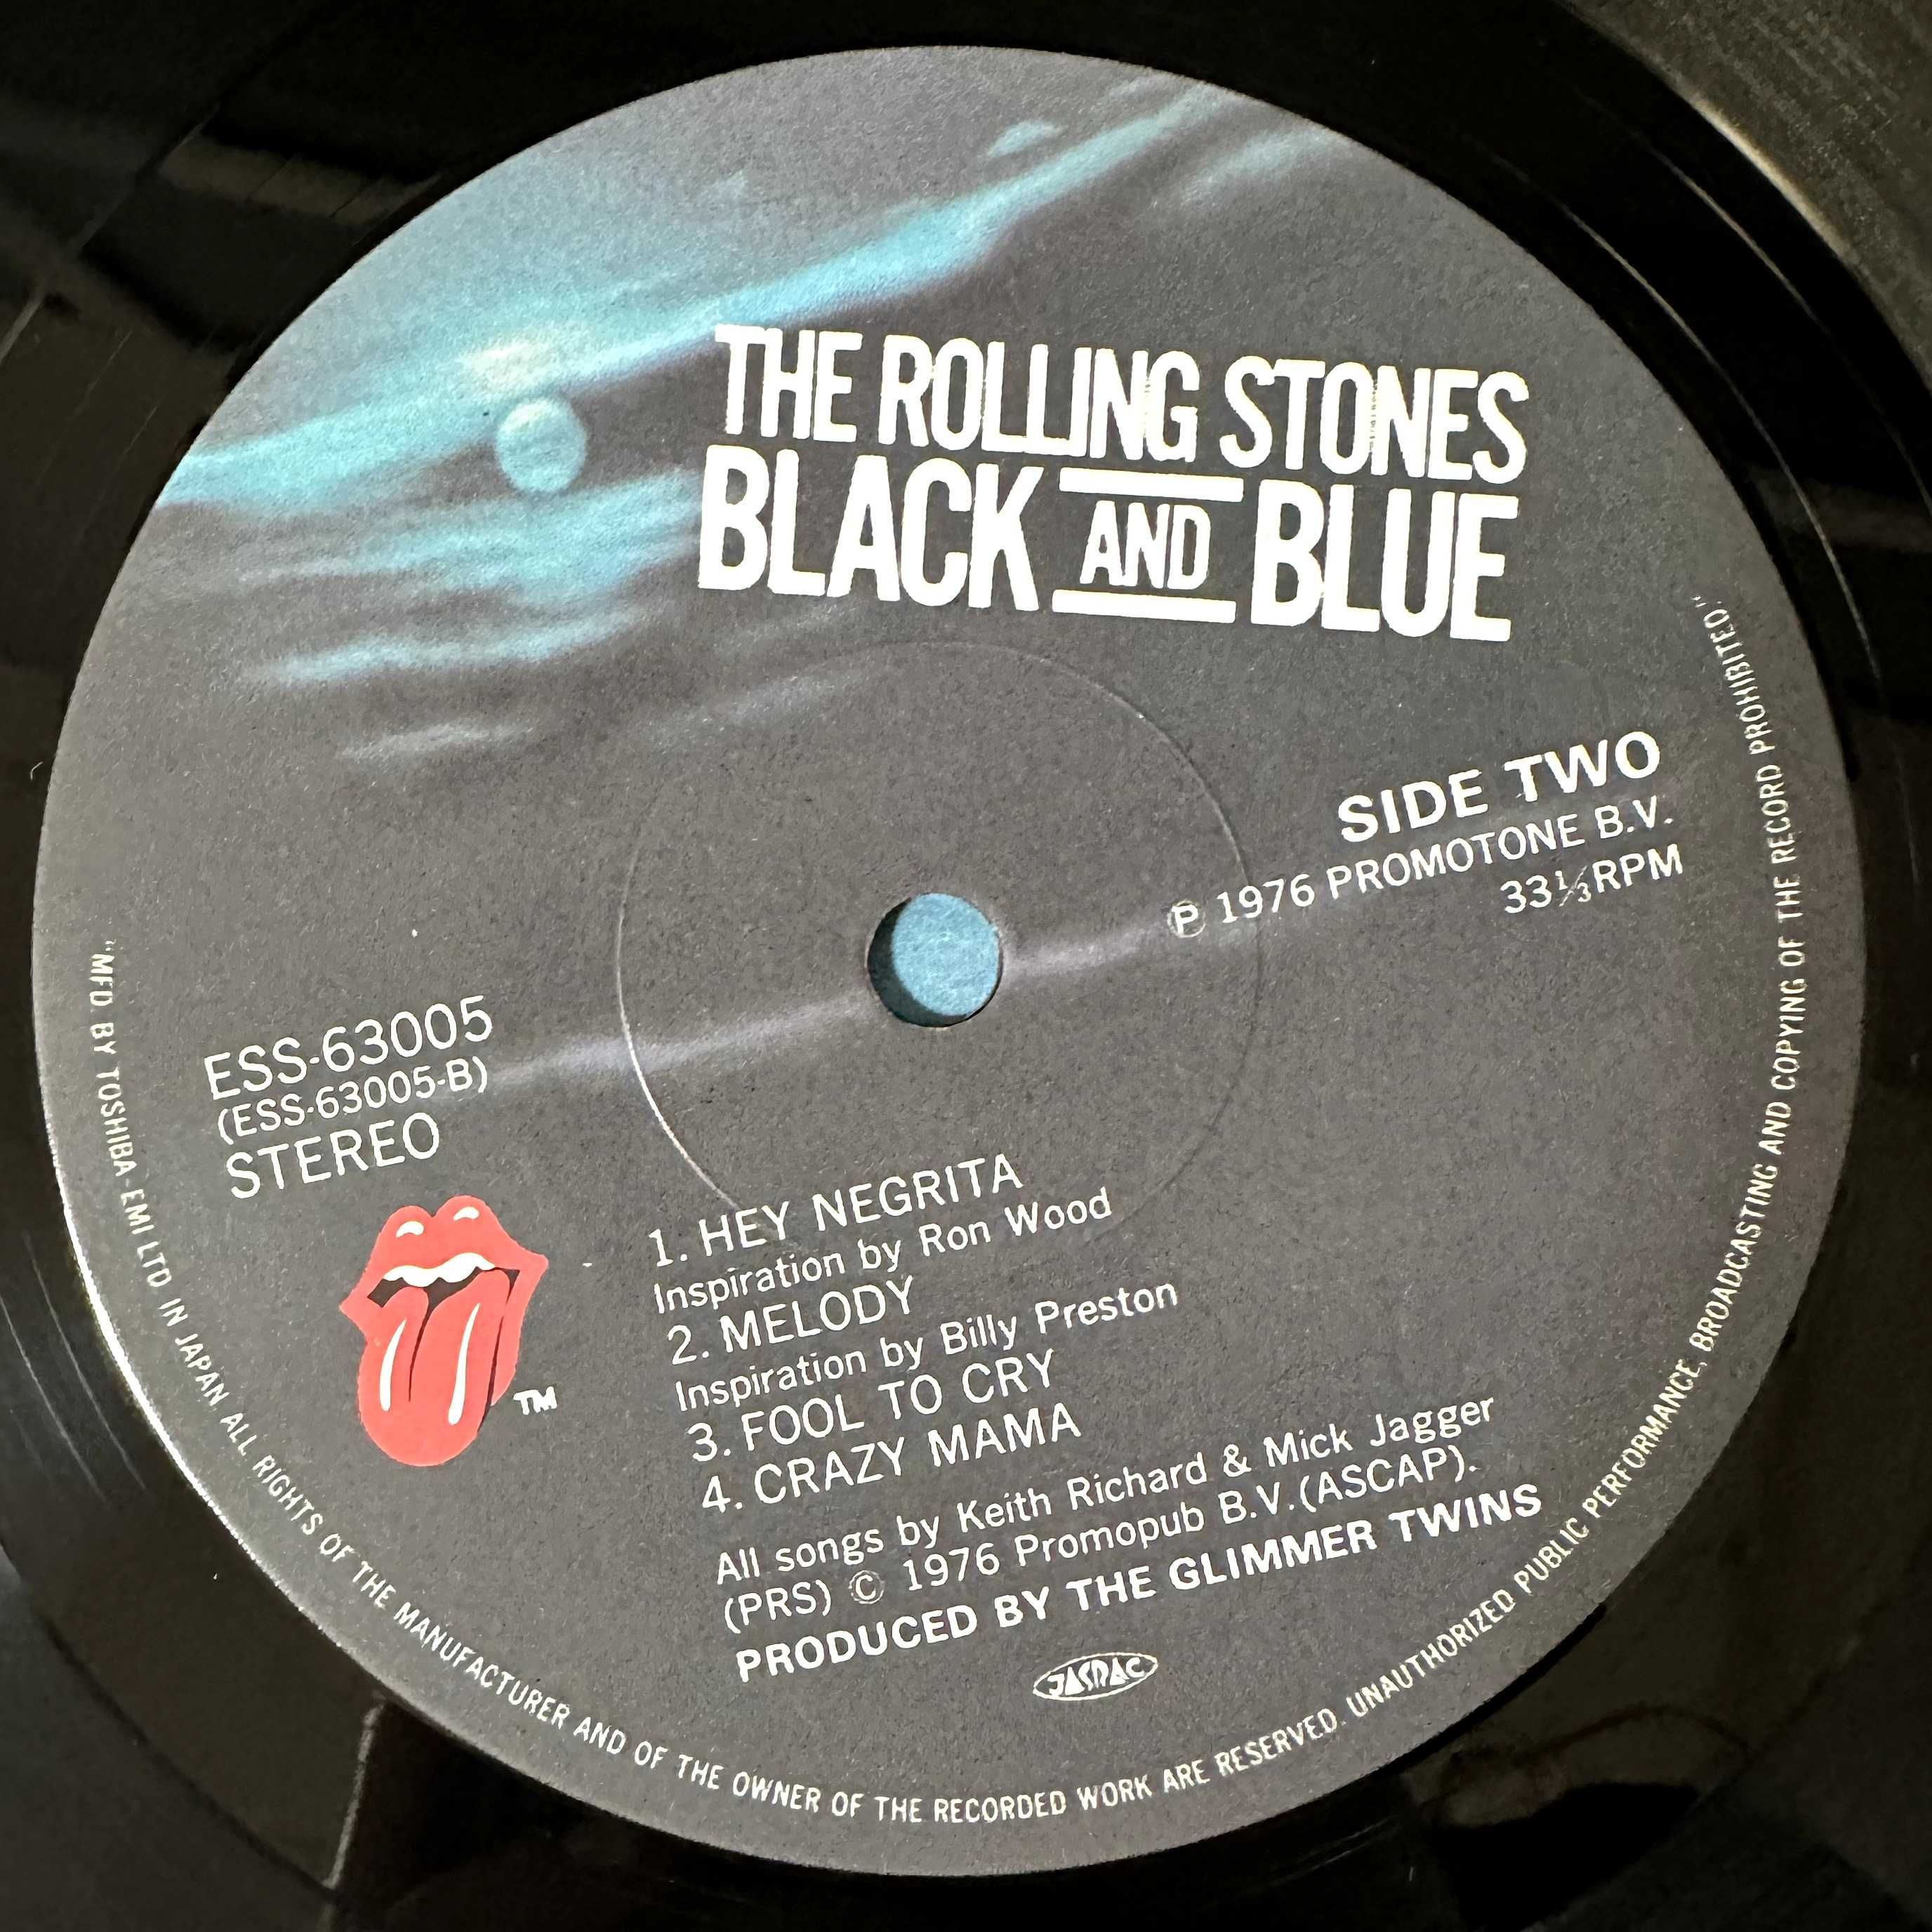 The Rolling Stones - Black and Blue (Vinyl, 1979, Japan)